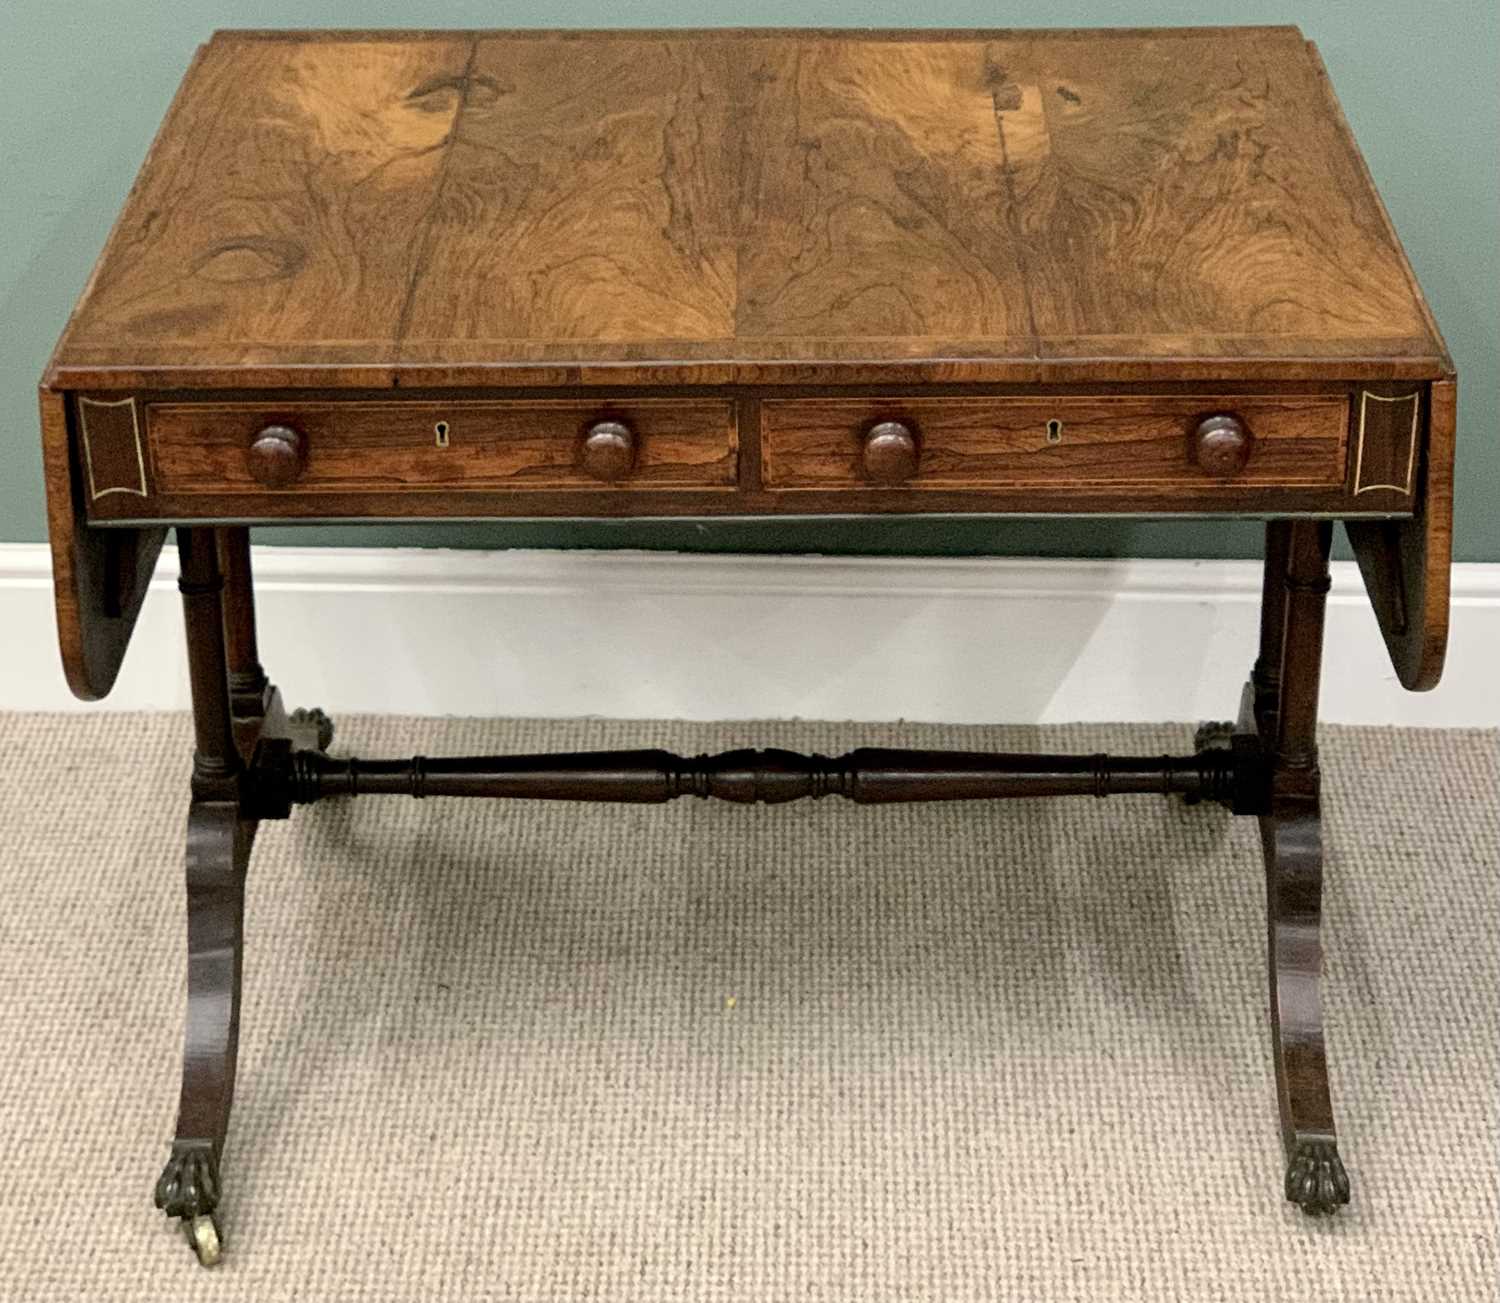 REGENCY ROSEWOOD SOFA TABLE - having two drawers and two opposing blind drawers, boxwood stringing